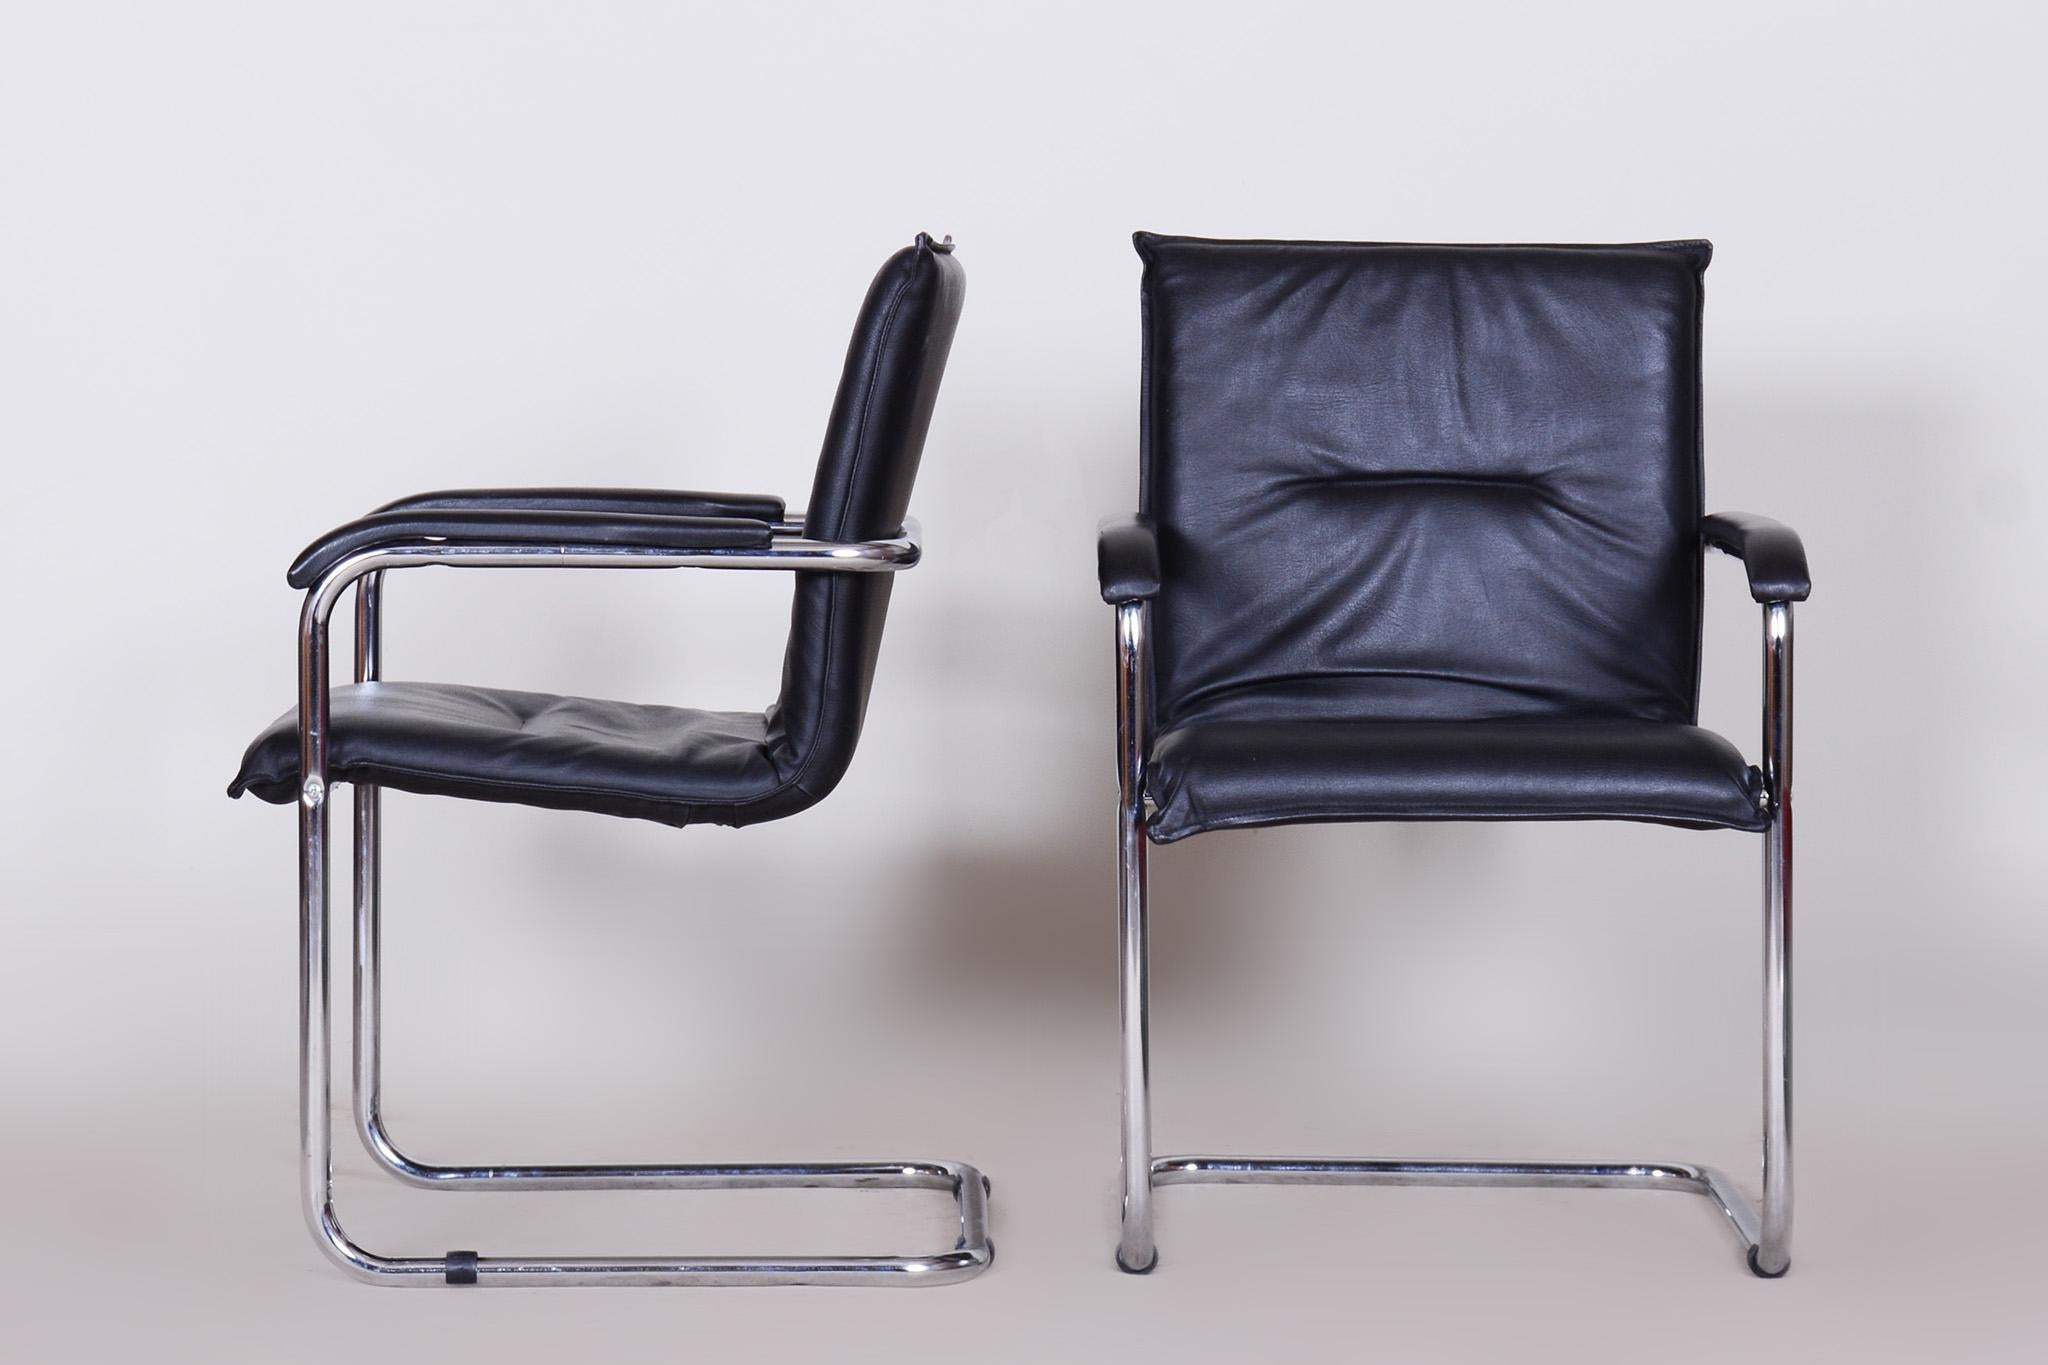 Pair of Black Bauhaus Chairs, Artificial Leather, 1970s, Germany In Good Condition For Sale In Horomerice, CZ